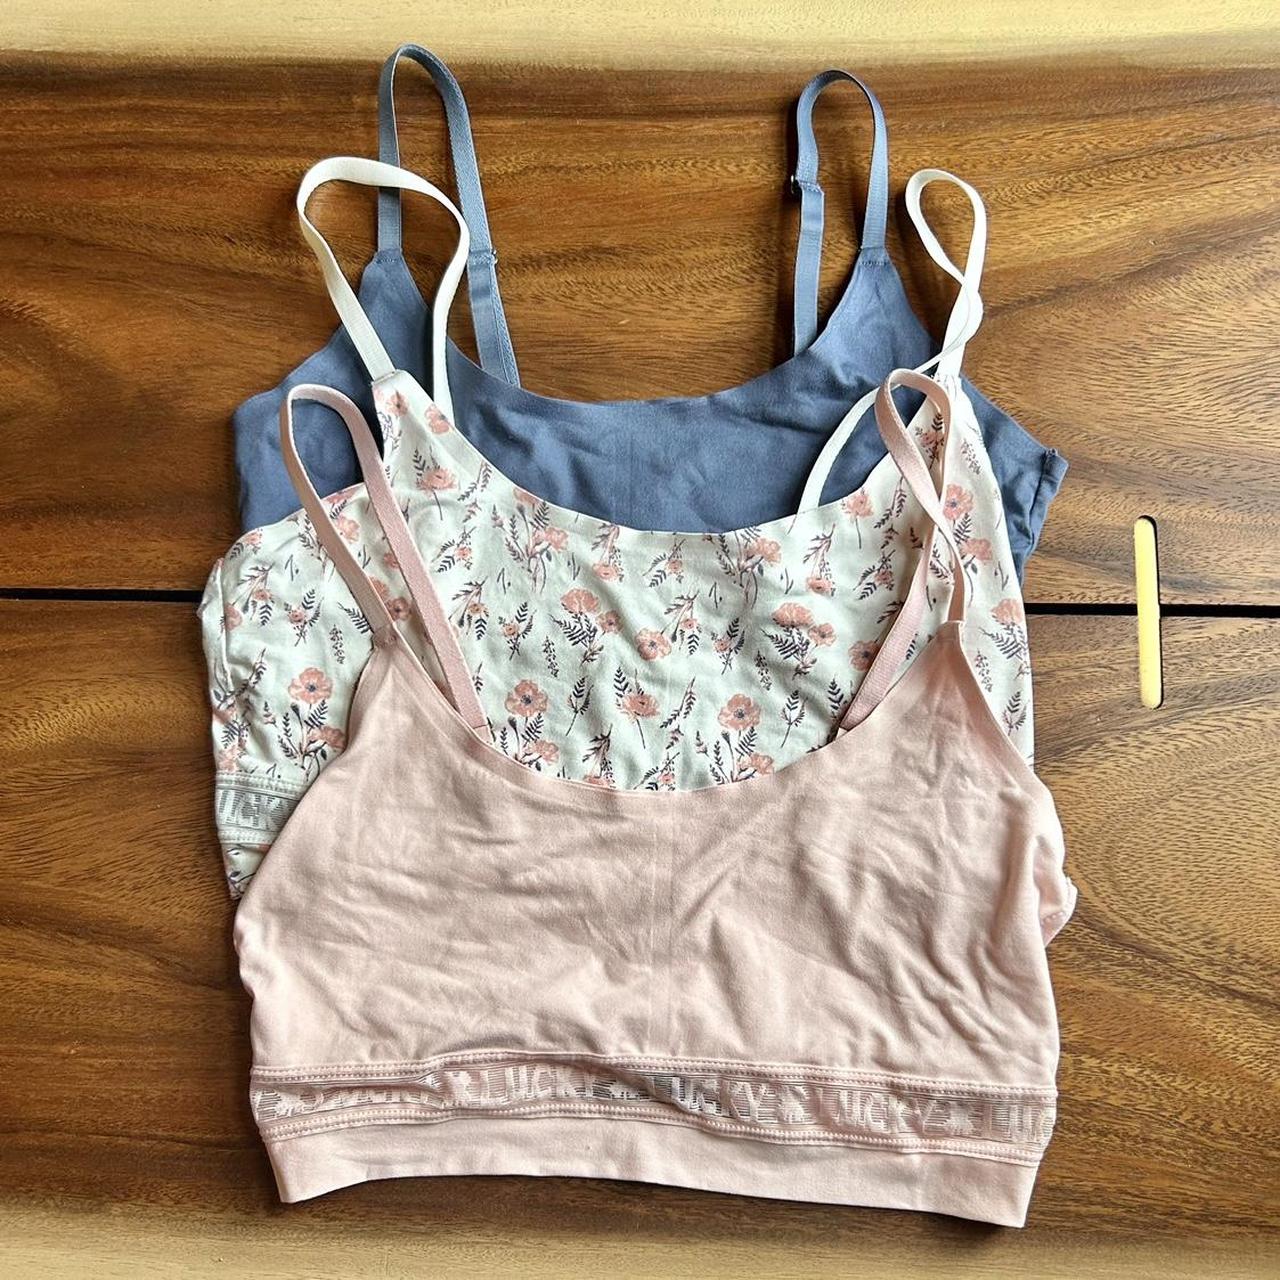 Lucky bralette set 🍀 Minimal use, too small for me. - Depop